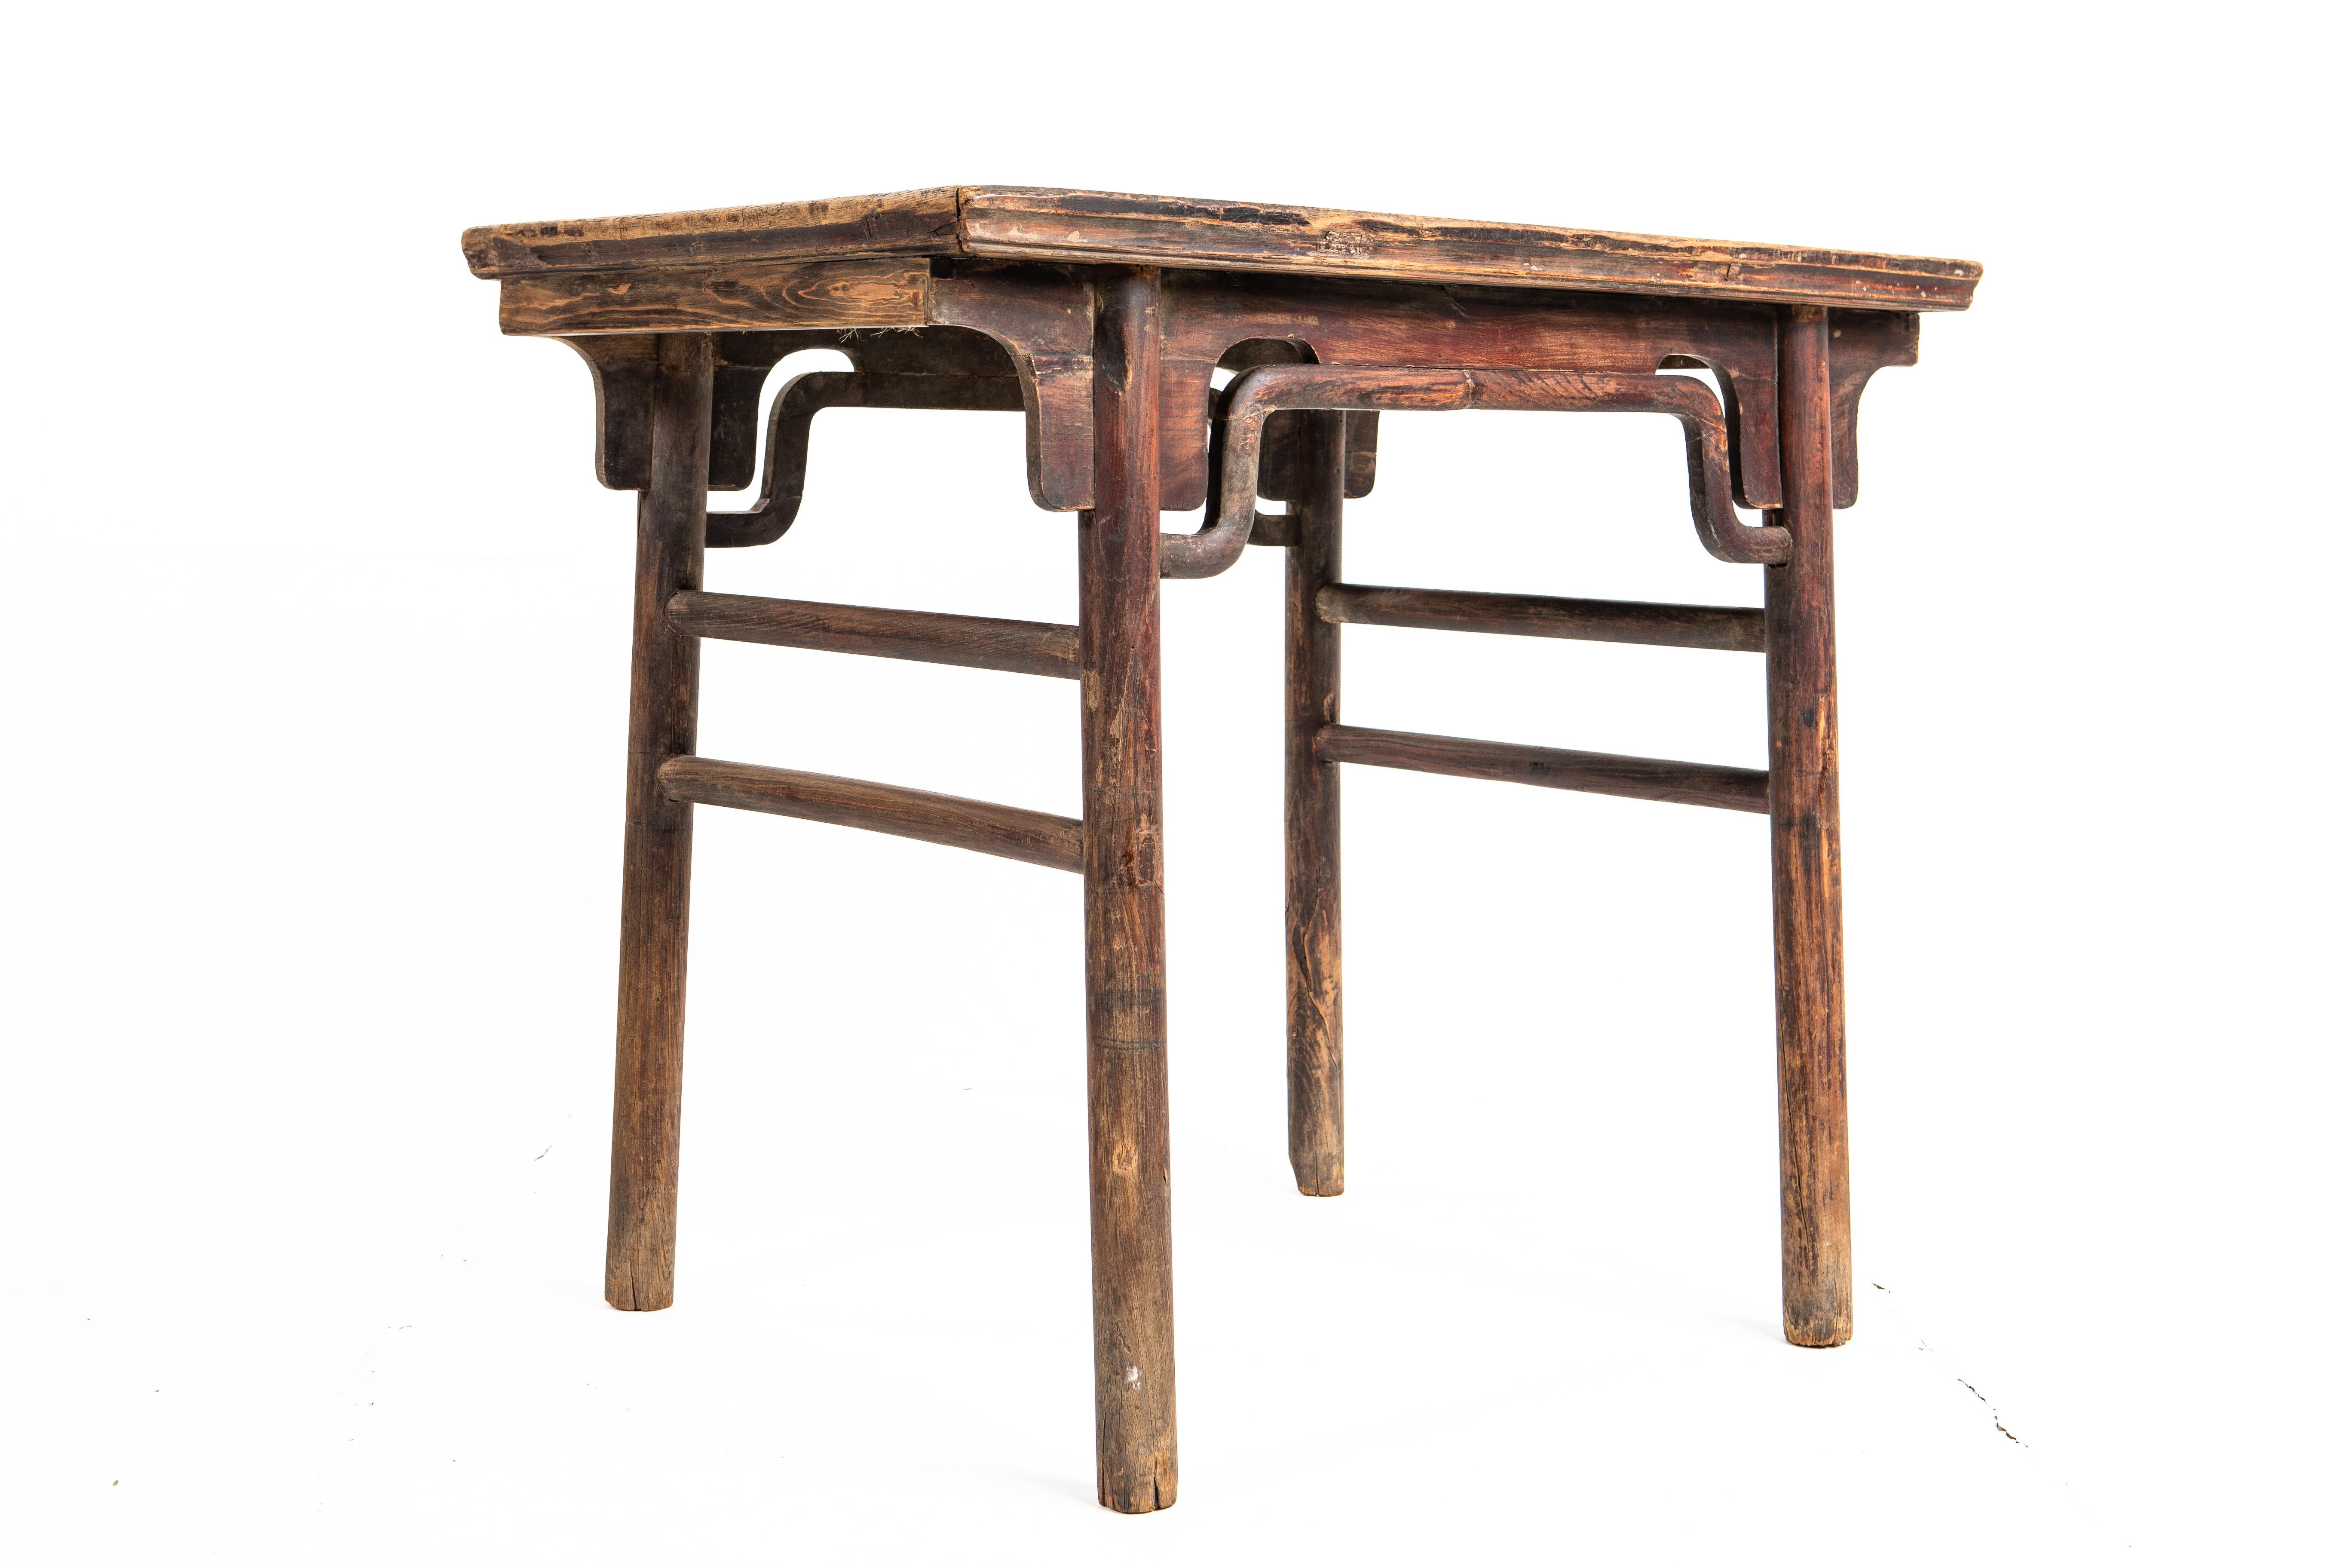 Early Qing Dynasty Painting Table (Qing-Dynastie)